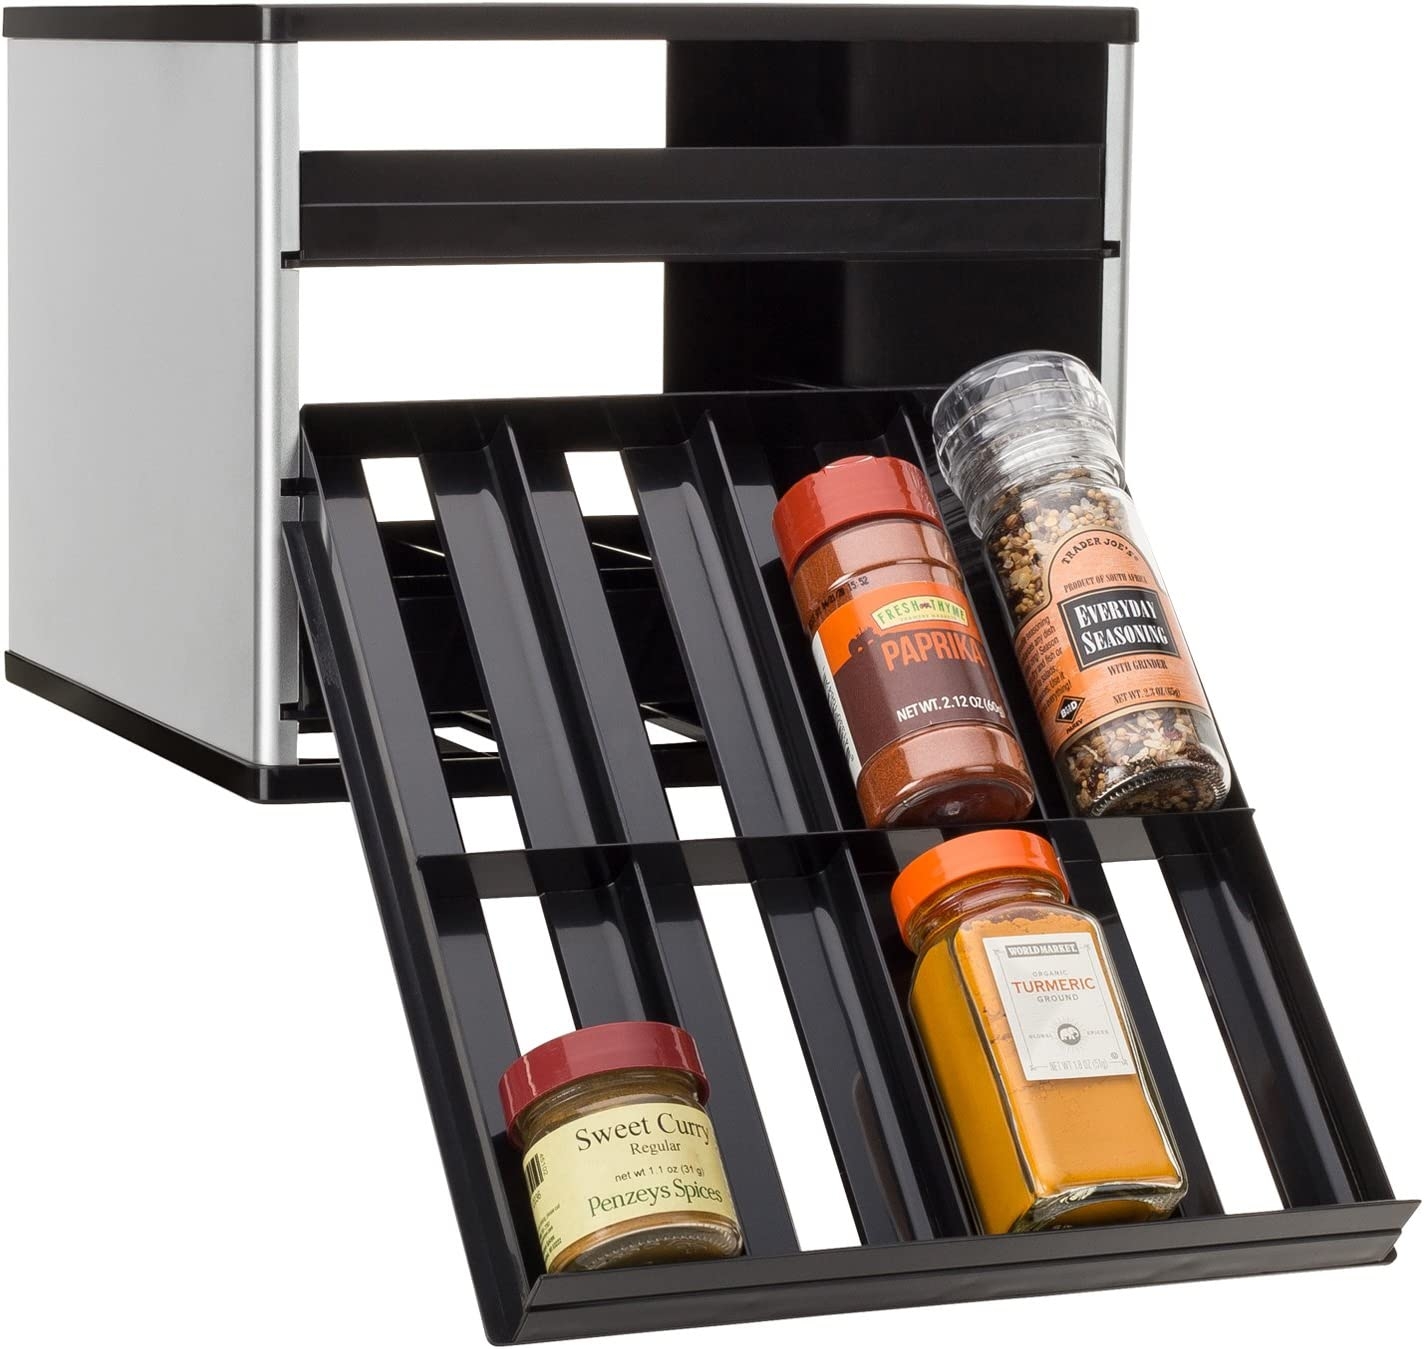 YouCopia Adjustable SpiceStack Spice Rack Organizer, White Import To Shop ×Product customization General Description Gallery